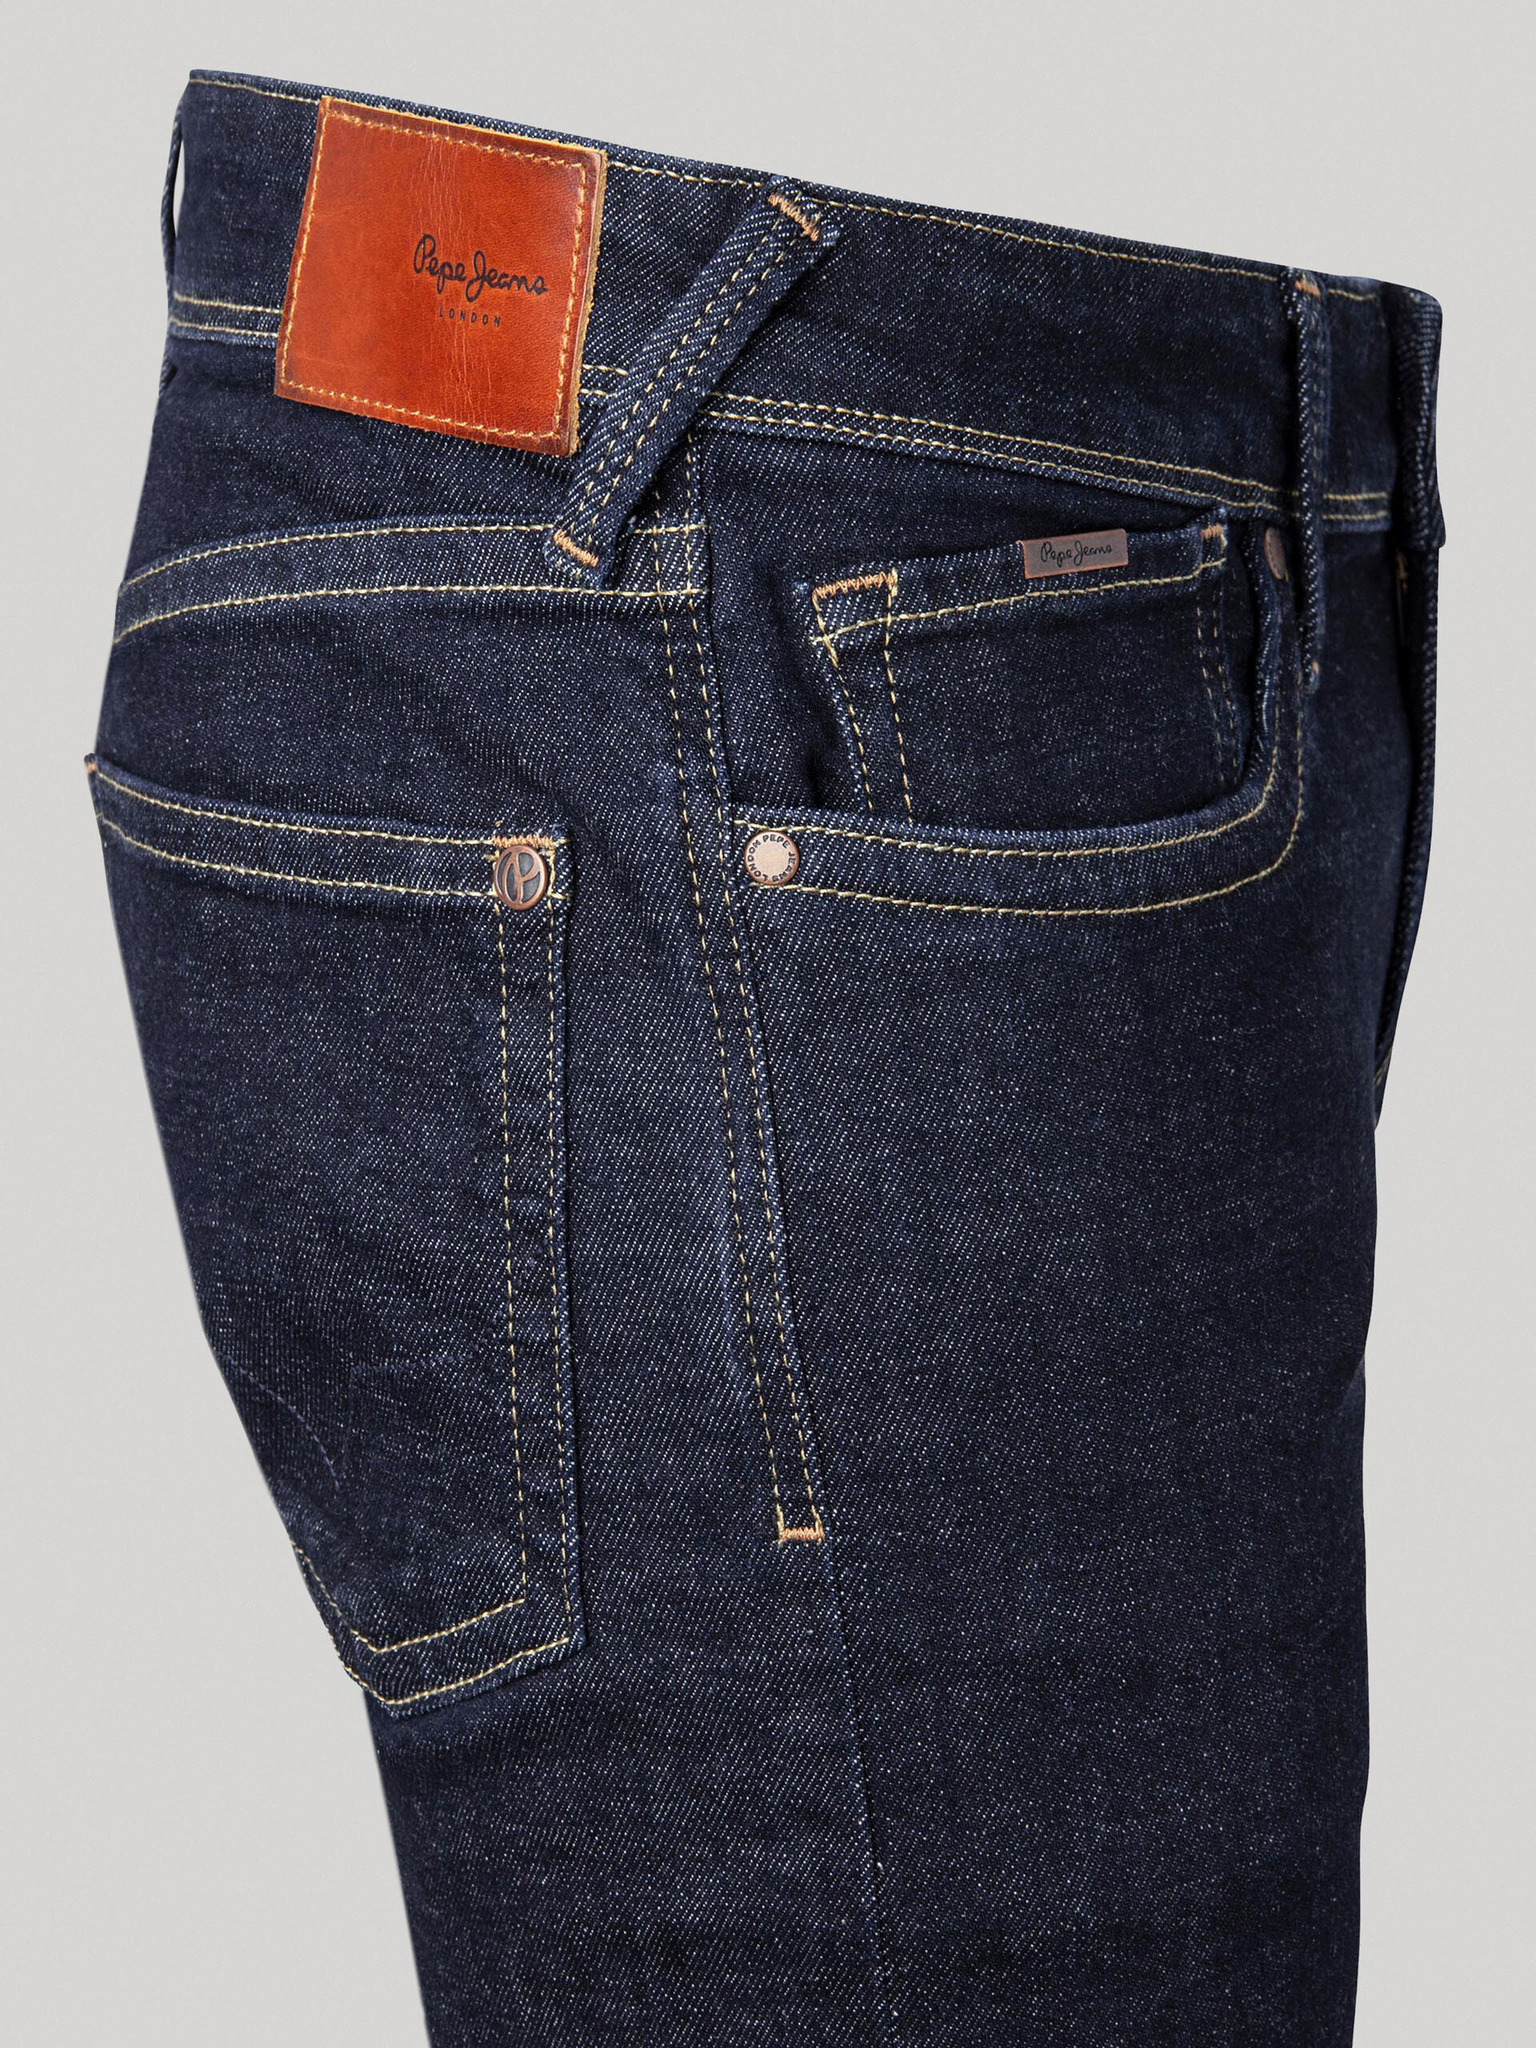 - Hatch Pepe Jeans Jeans